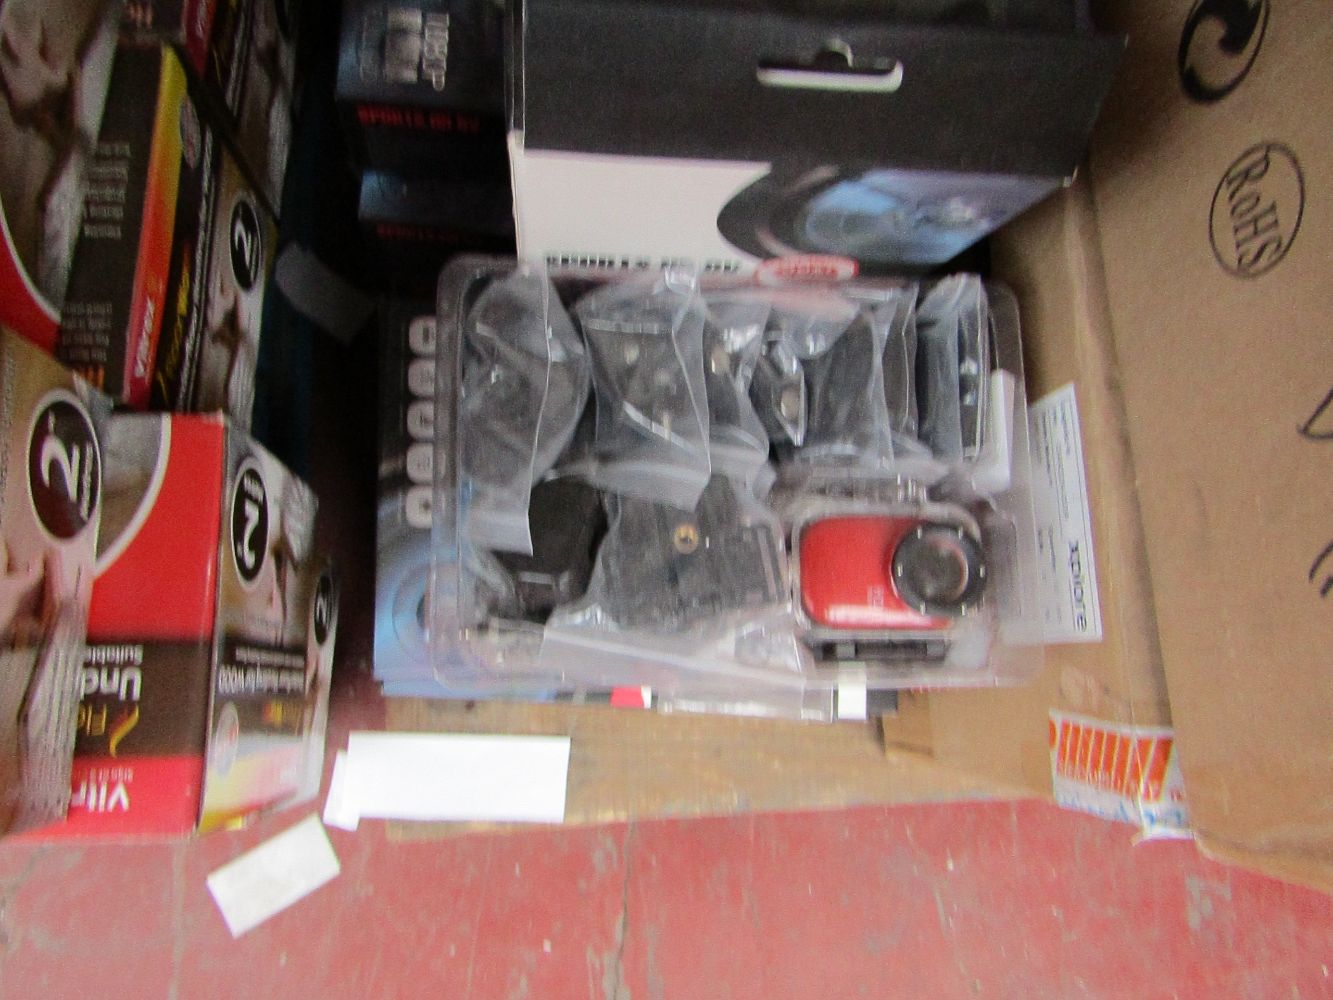 Electrical Auction containing;  Action cameras, Startastics,Treadmills,Arcade Game White goods  and much more!